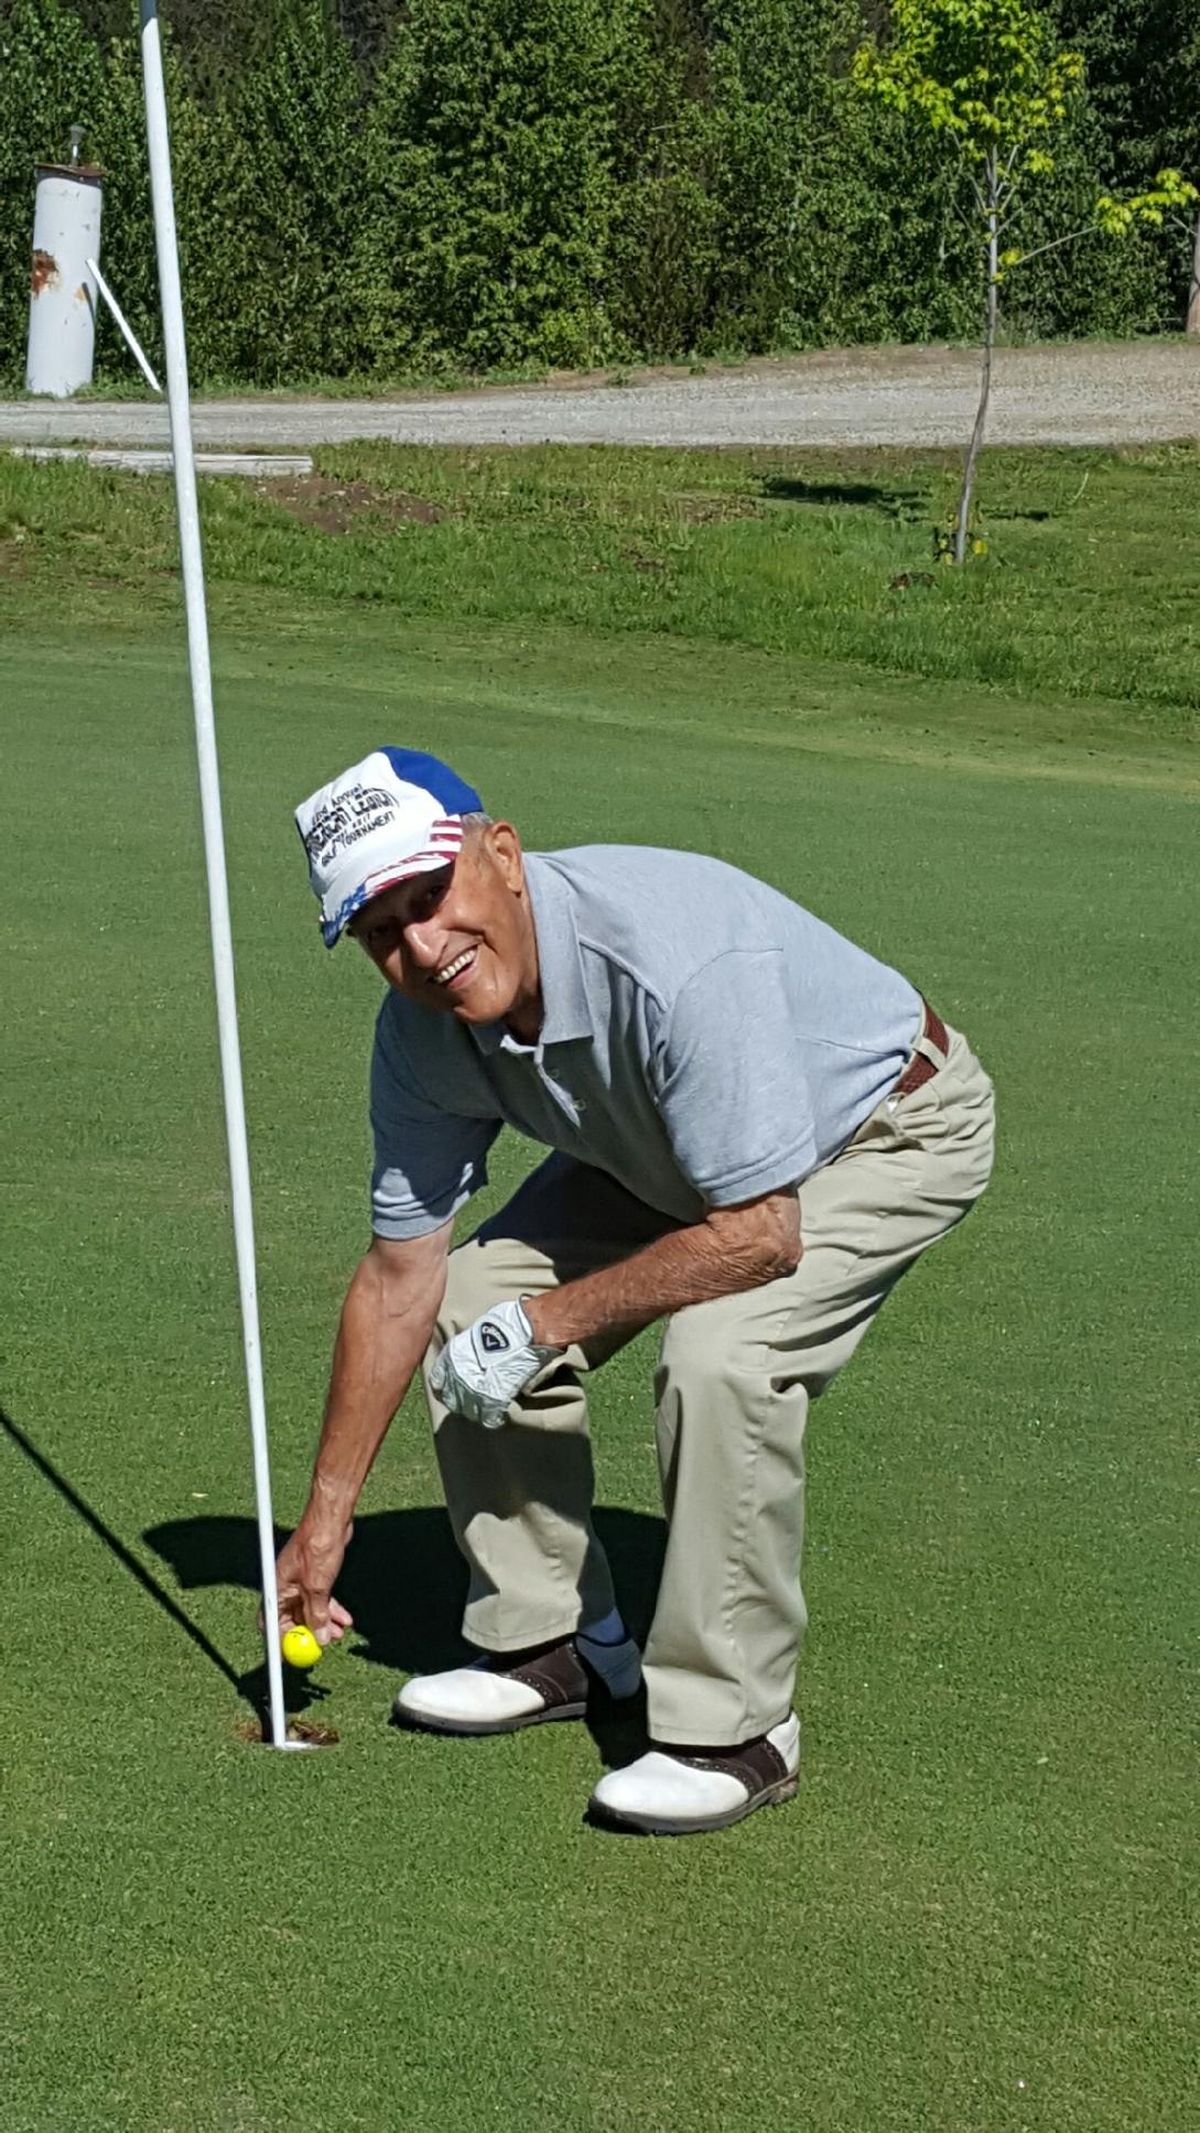 Frank Capehart poses after his first hole-in-one on No. 1 at the Ranch Club. (Rolland Cox Sr. / Rolland Cox Sr. photo)